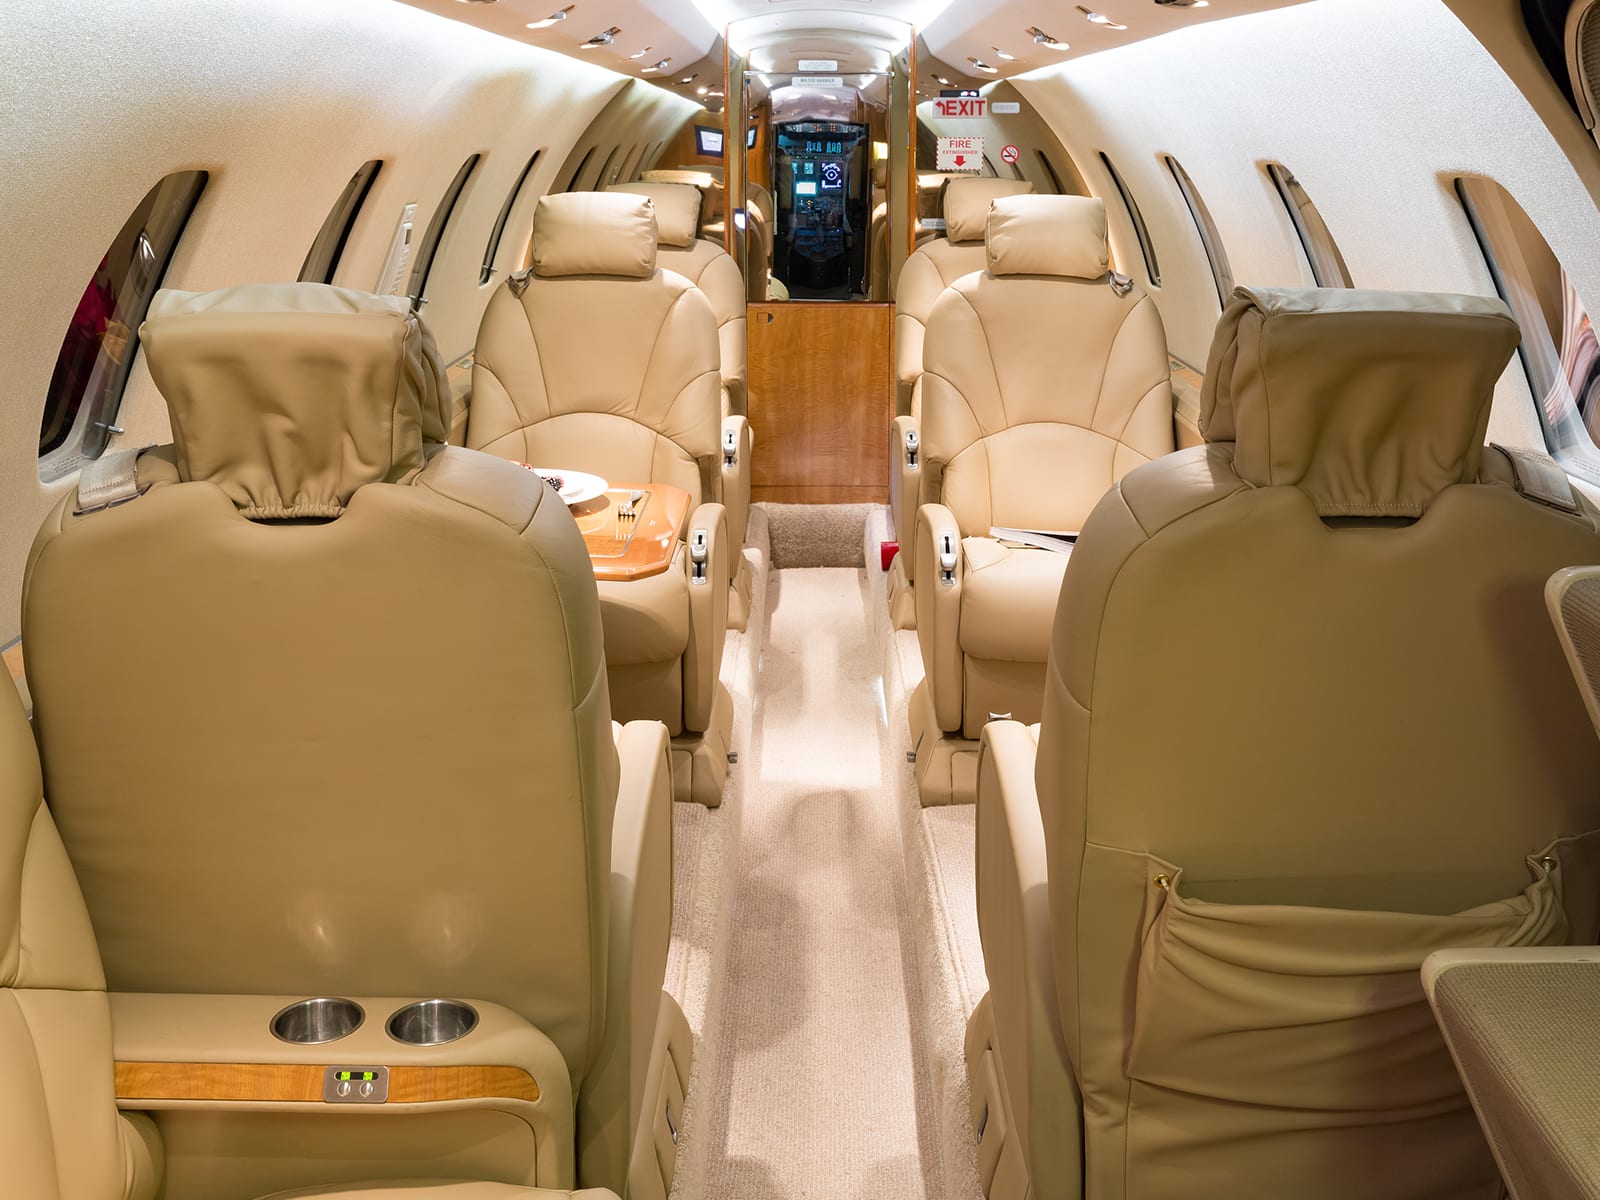 The inside of a Priority Jet airplane